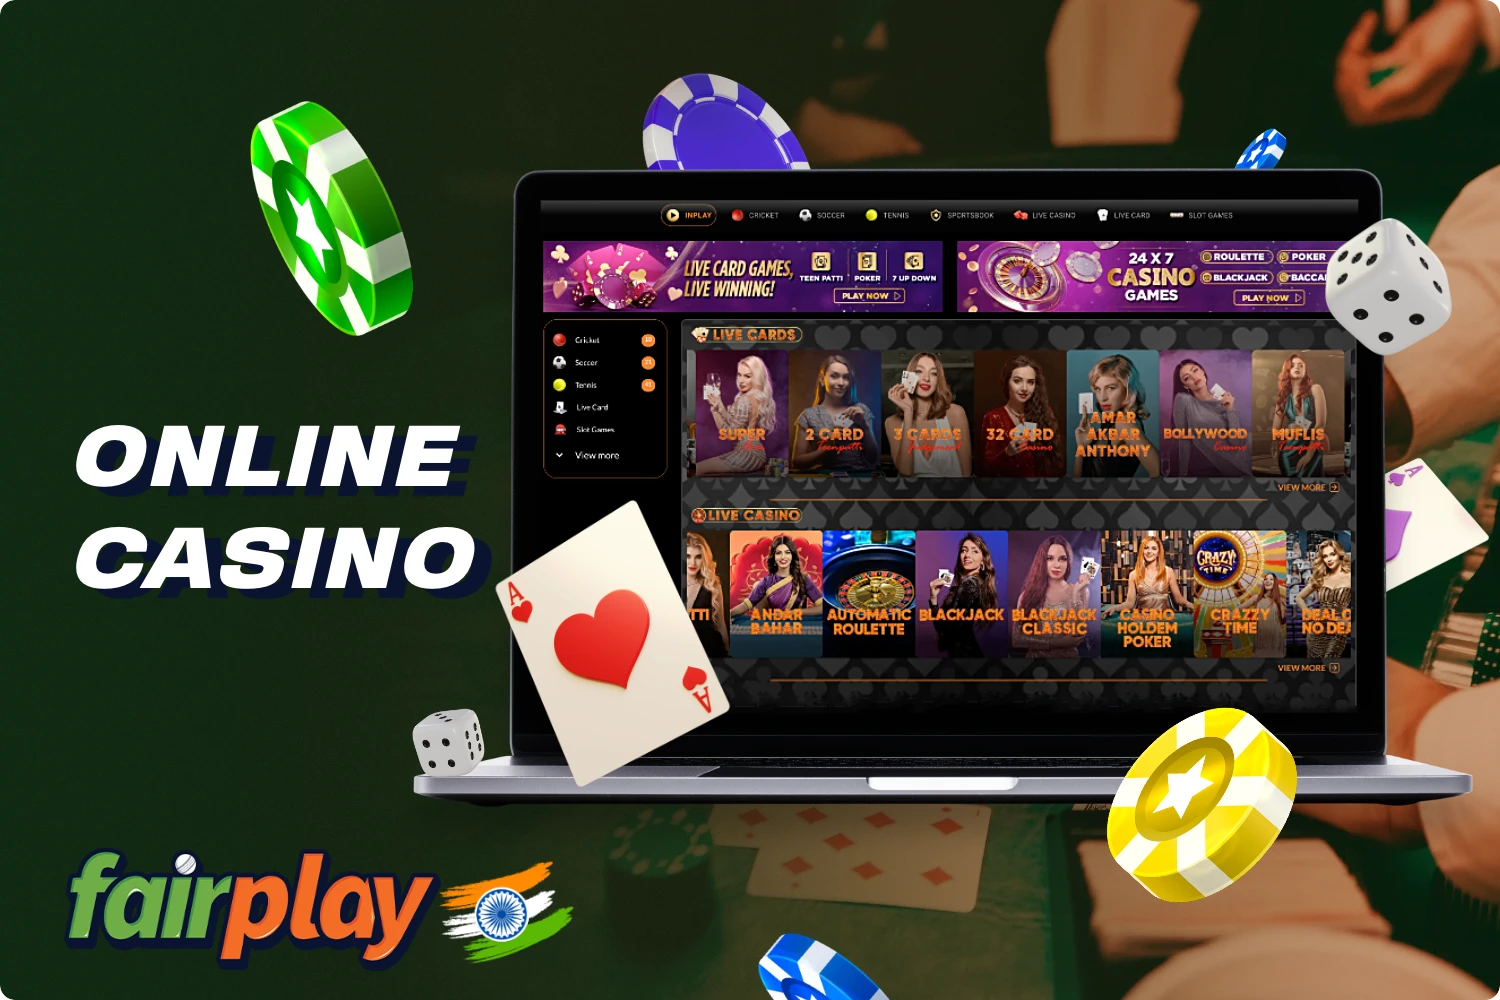 A special casino section on the Fairplay platform allows players from India to fully immerse themselves in the gambling atmosphere